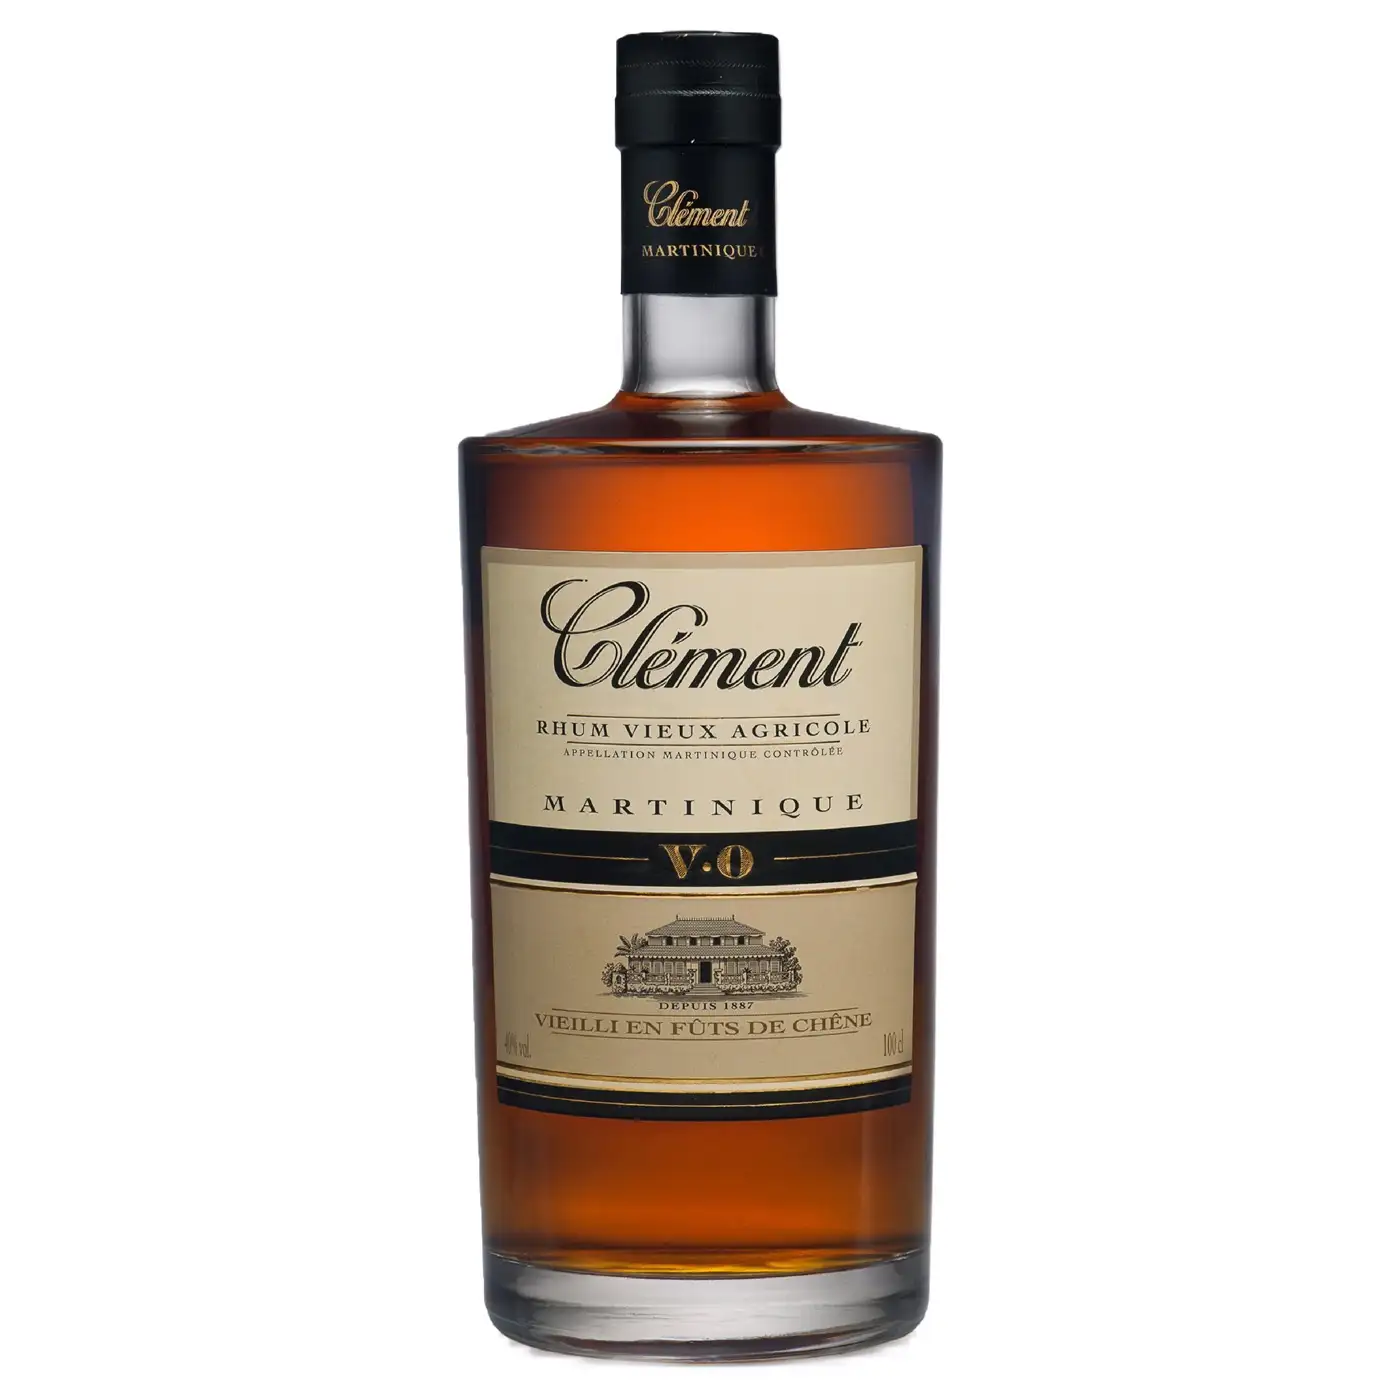 Image of the front of the bottle of the rum Clément VO